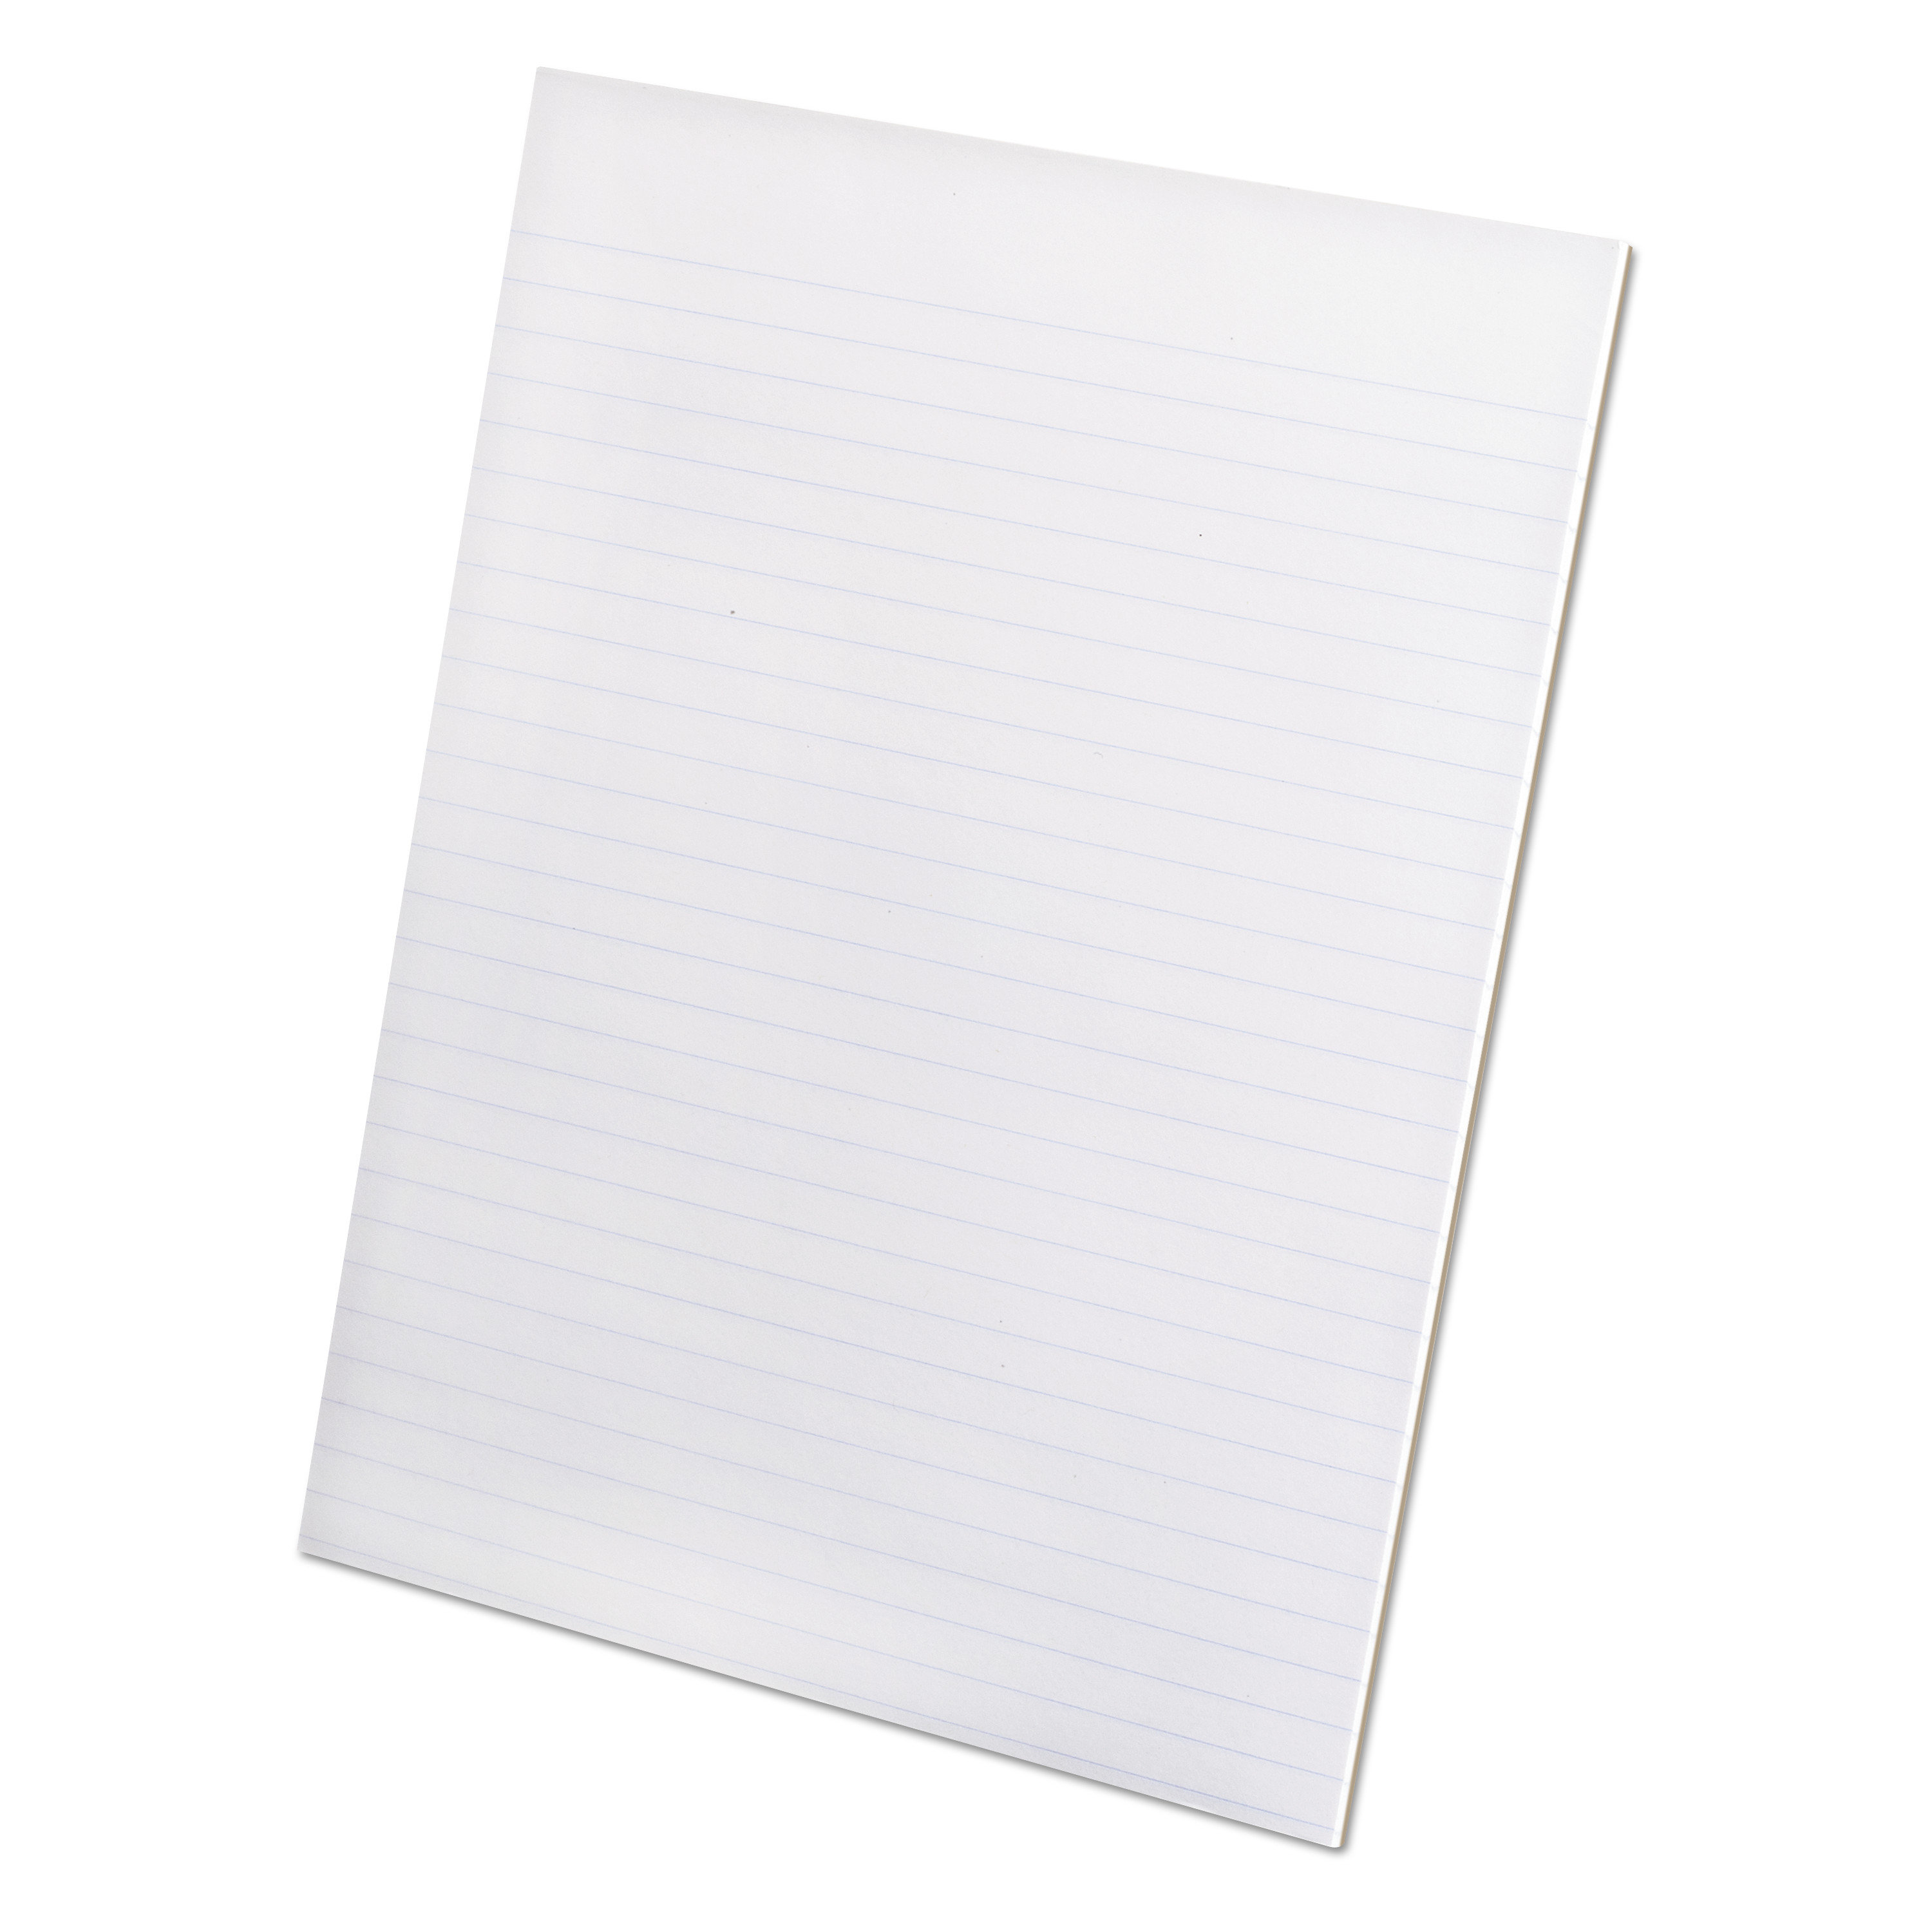  Ampad 21-162 Recycled Glue Top Pads, Wide/Legal Rule, 8.5 x 11, White, 50 Sheets, Dozen (TOP21162) 